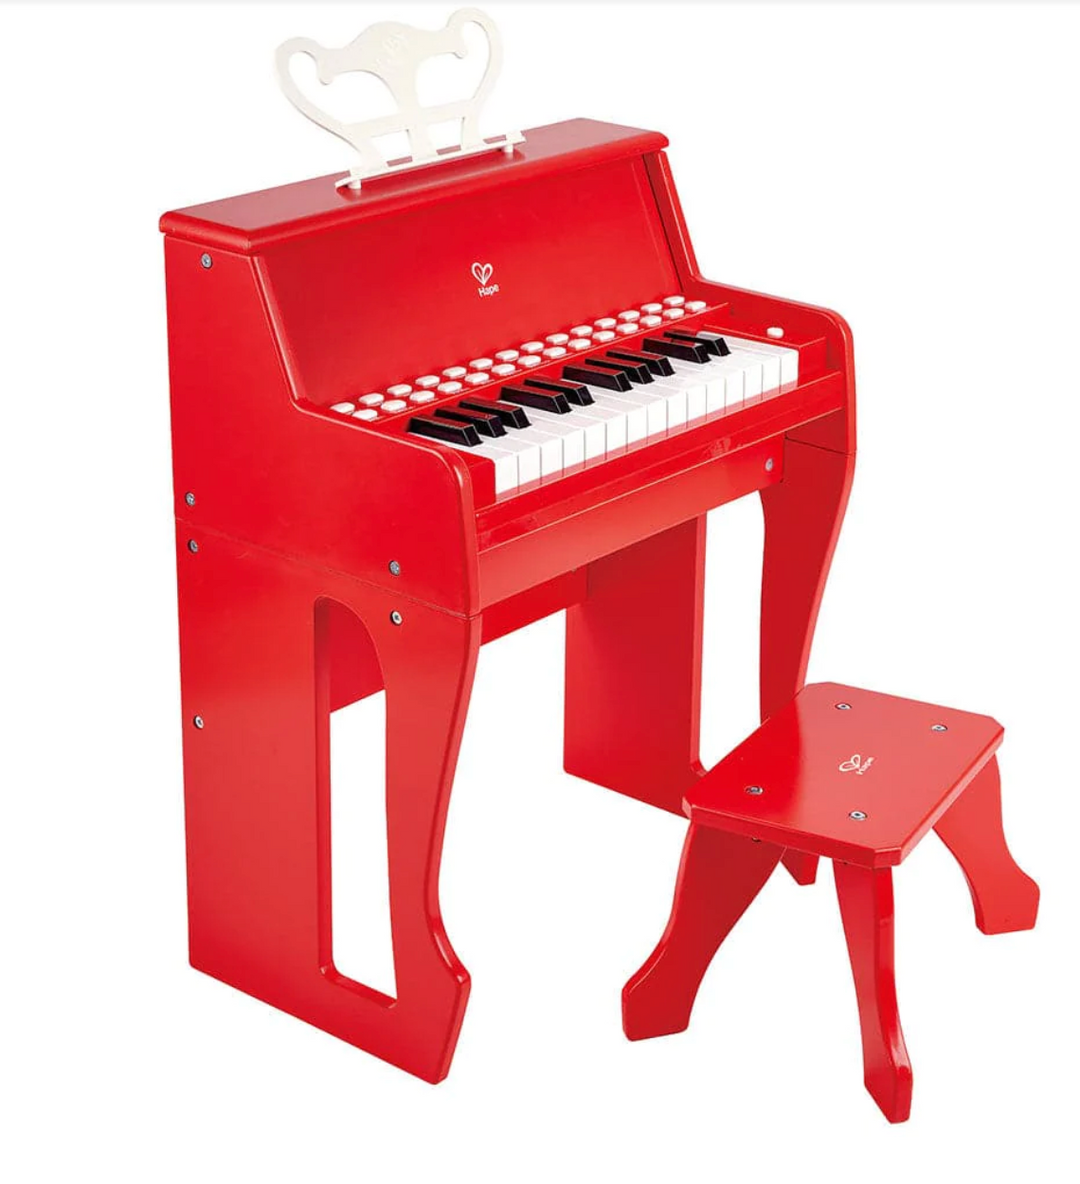 HAPPY GRAND PIANO - THE TOY STORE